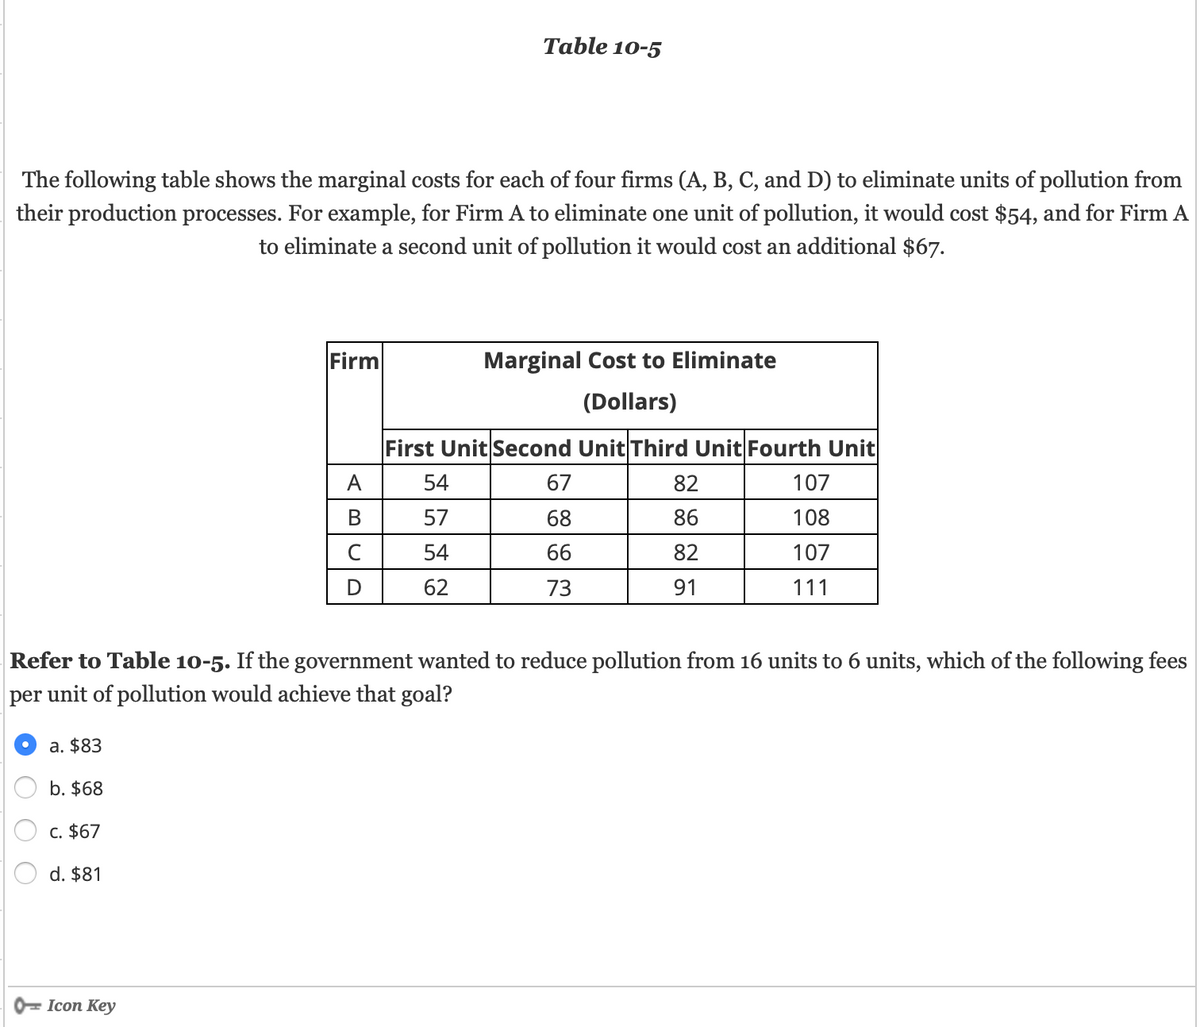 Table 10-5
The following table shows the marginal costs for each of four firms (A, B, C, and D) to eliminate units of pollution from
their production processes. For example, for Firm A to eliminate one unit of pollution, it would cost $54, and for Firm A
to eliminate a second unit of pollution it would cost an additional $67.
Firm
Marginal Cost to Eliminate
(Dollars)
First Unit Second Unit Third Unit Fourth Unit
A
54
67
82
107
В
57
68
86
108
54
66
82
107
D
62
73
91
111
Refer to Table 10-5. If the government wanted to reduce pollution from 16 units to 6 units, which of the following fees
per unit of pollution would achieve that goal?
a. $83
b. $68
C. $67
d. $81
0= Icon Key
